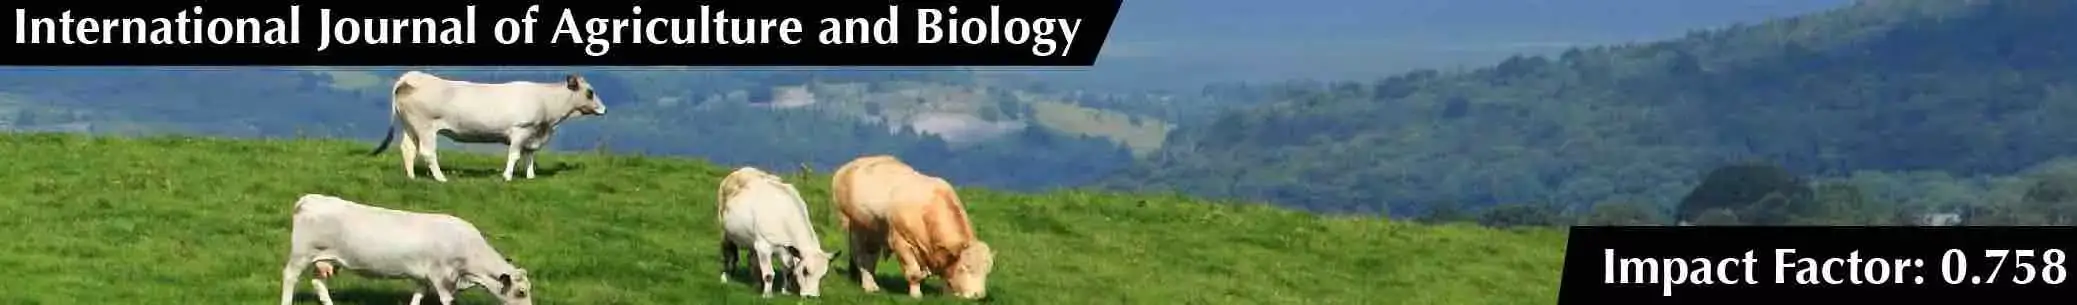 International Journal of Agriculture and Biology